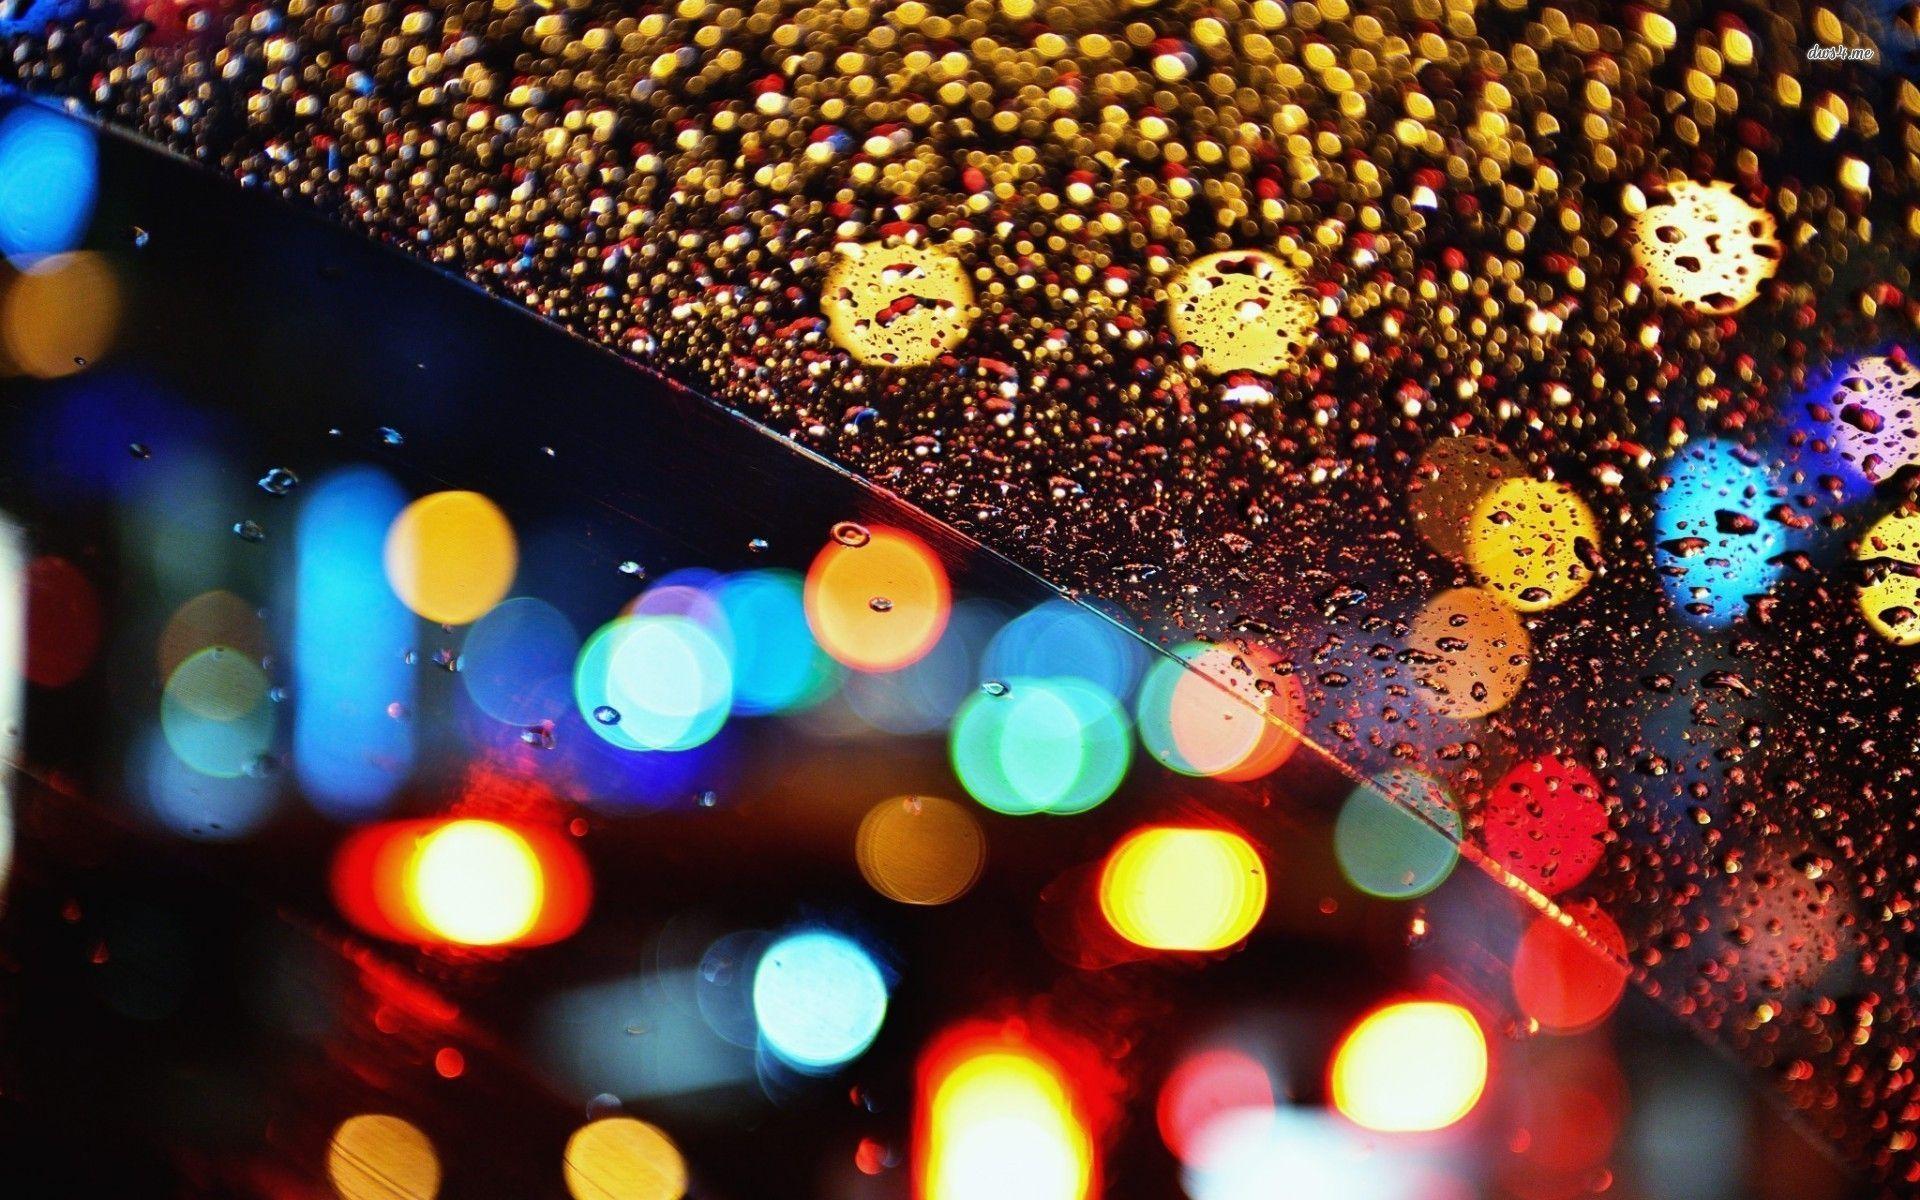 Multicolored lights behind the rainy window wallpaper